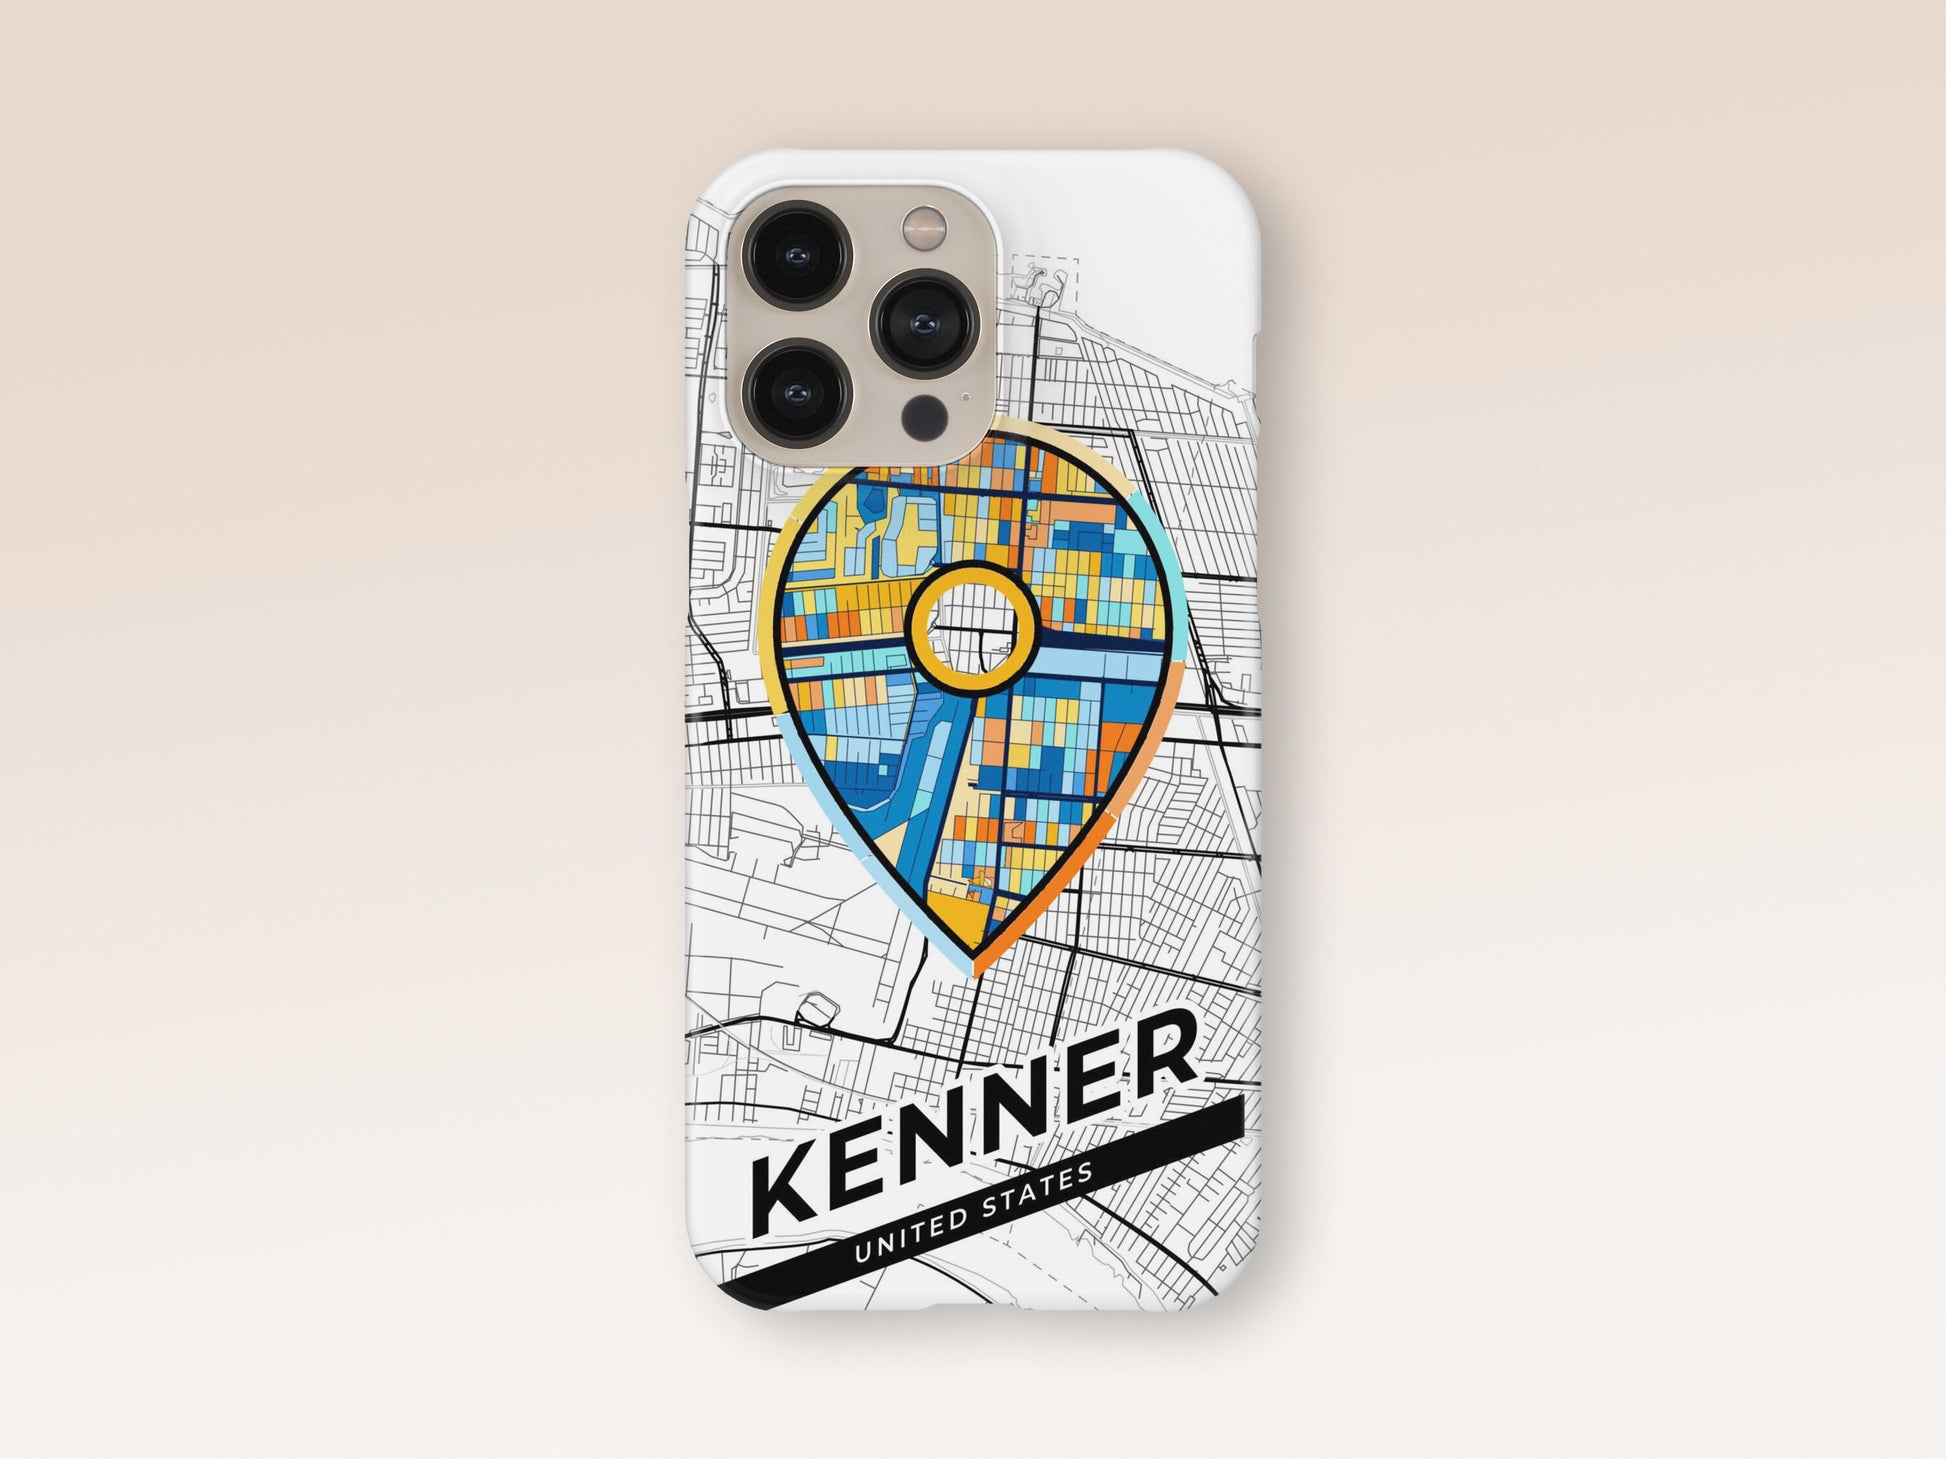 Kenner Louisiana slim phone case with colorful icon. Birthday, wedding or housewarming gift. Couple match cases. 1